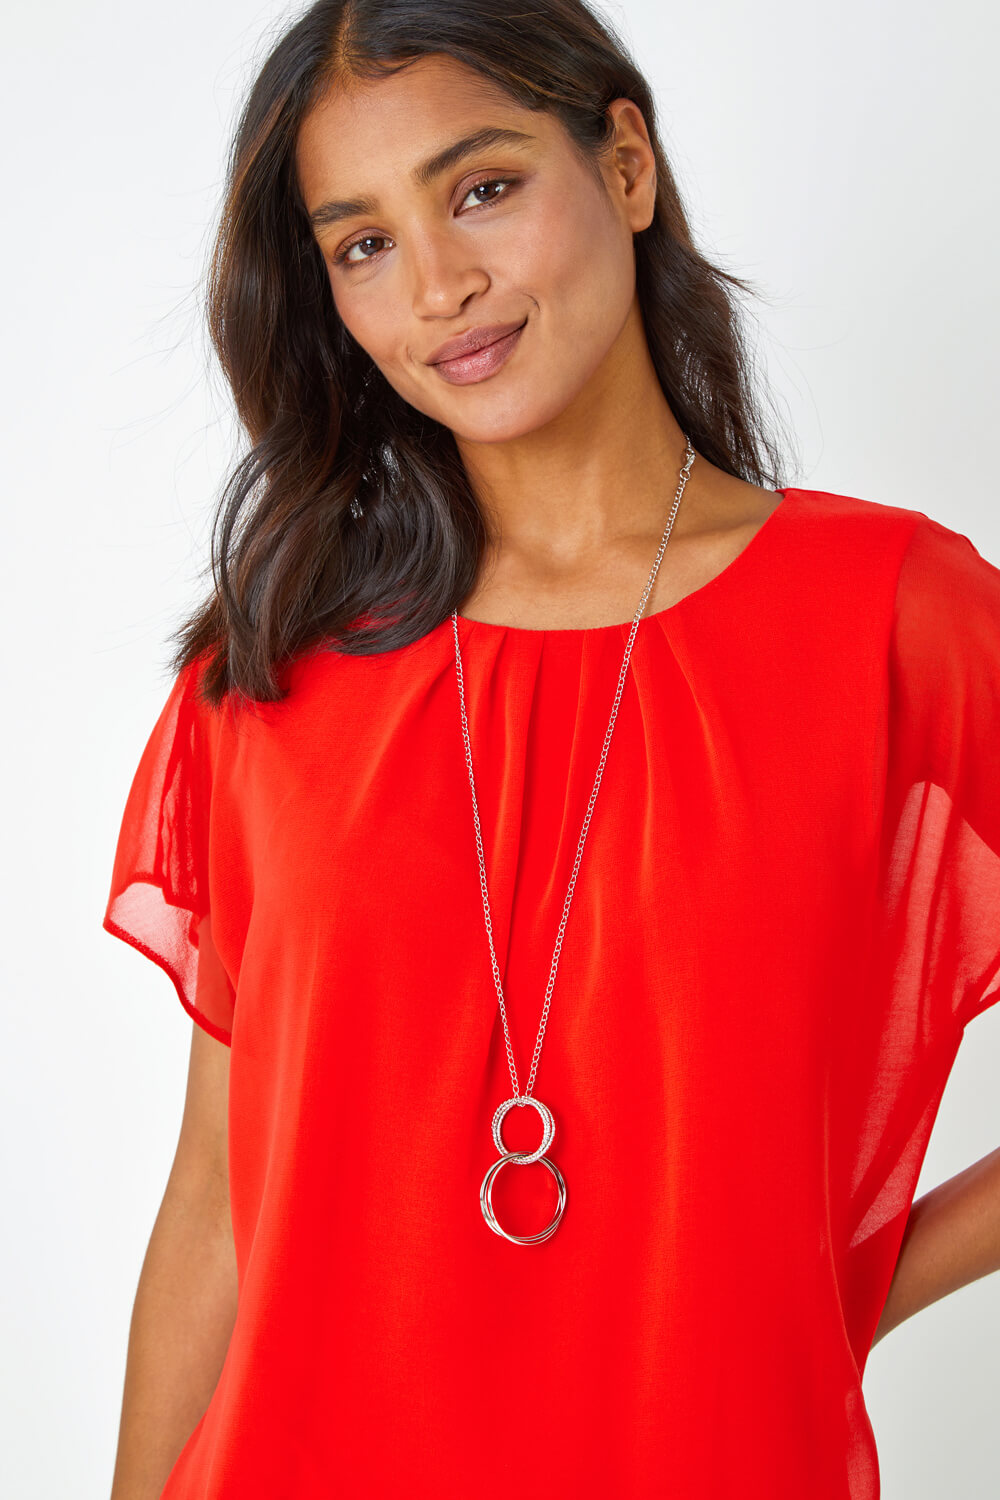 ORANGE Chiffon Jersey Blouson Top with Necklace, Image 4 of 5